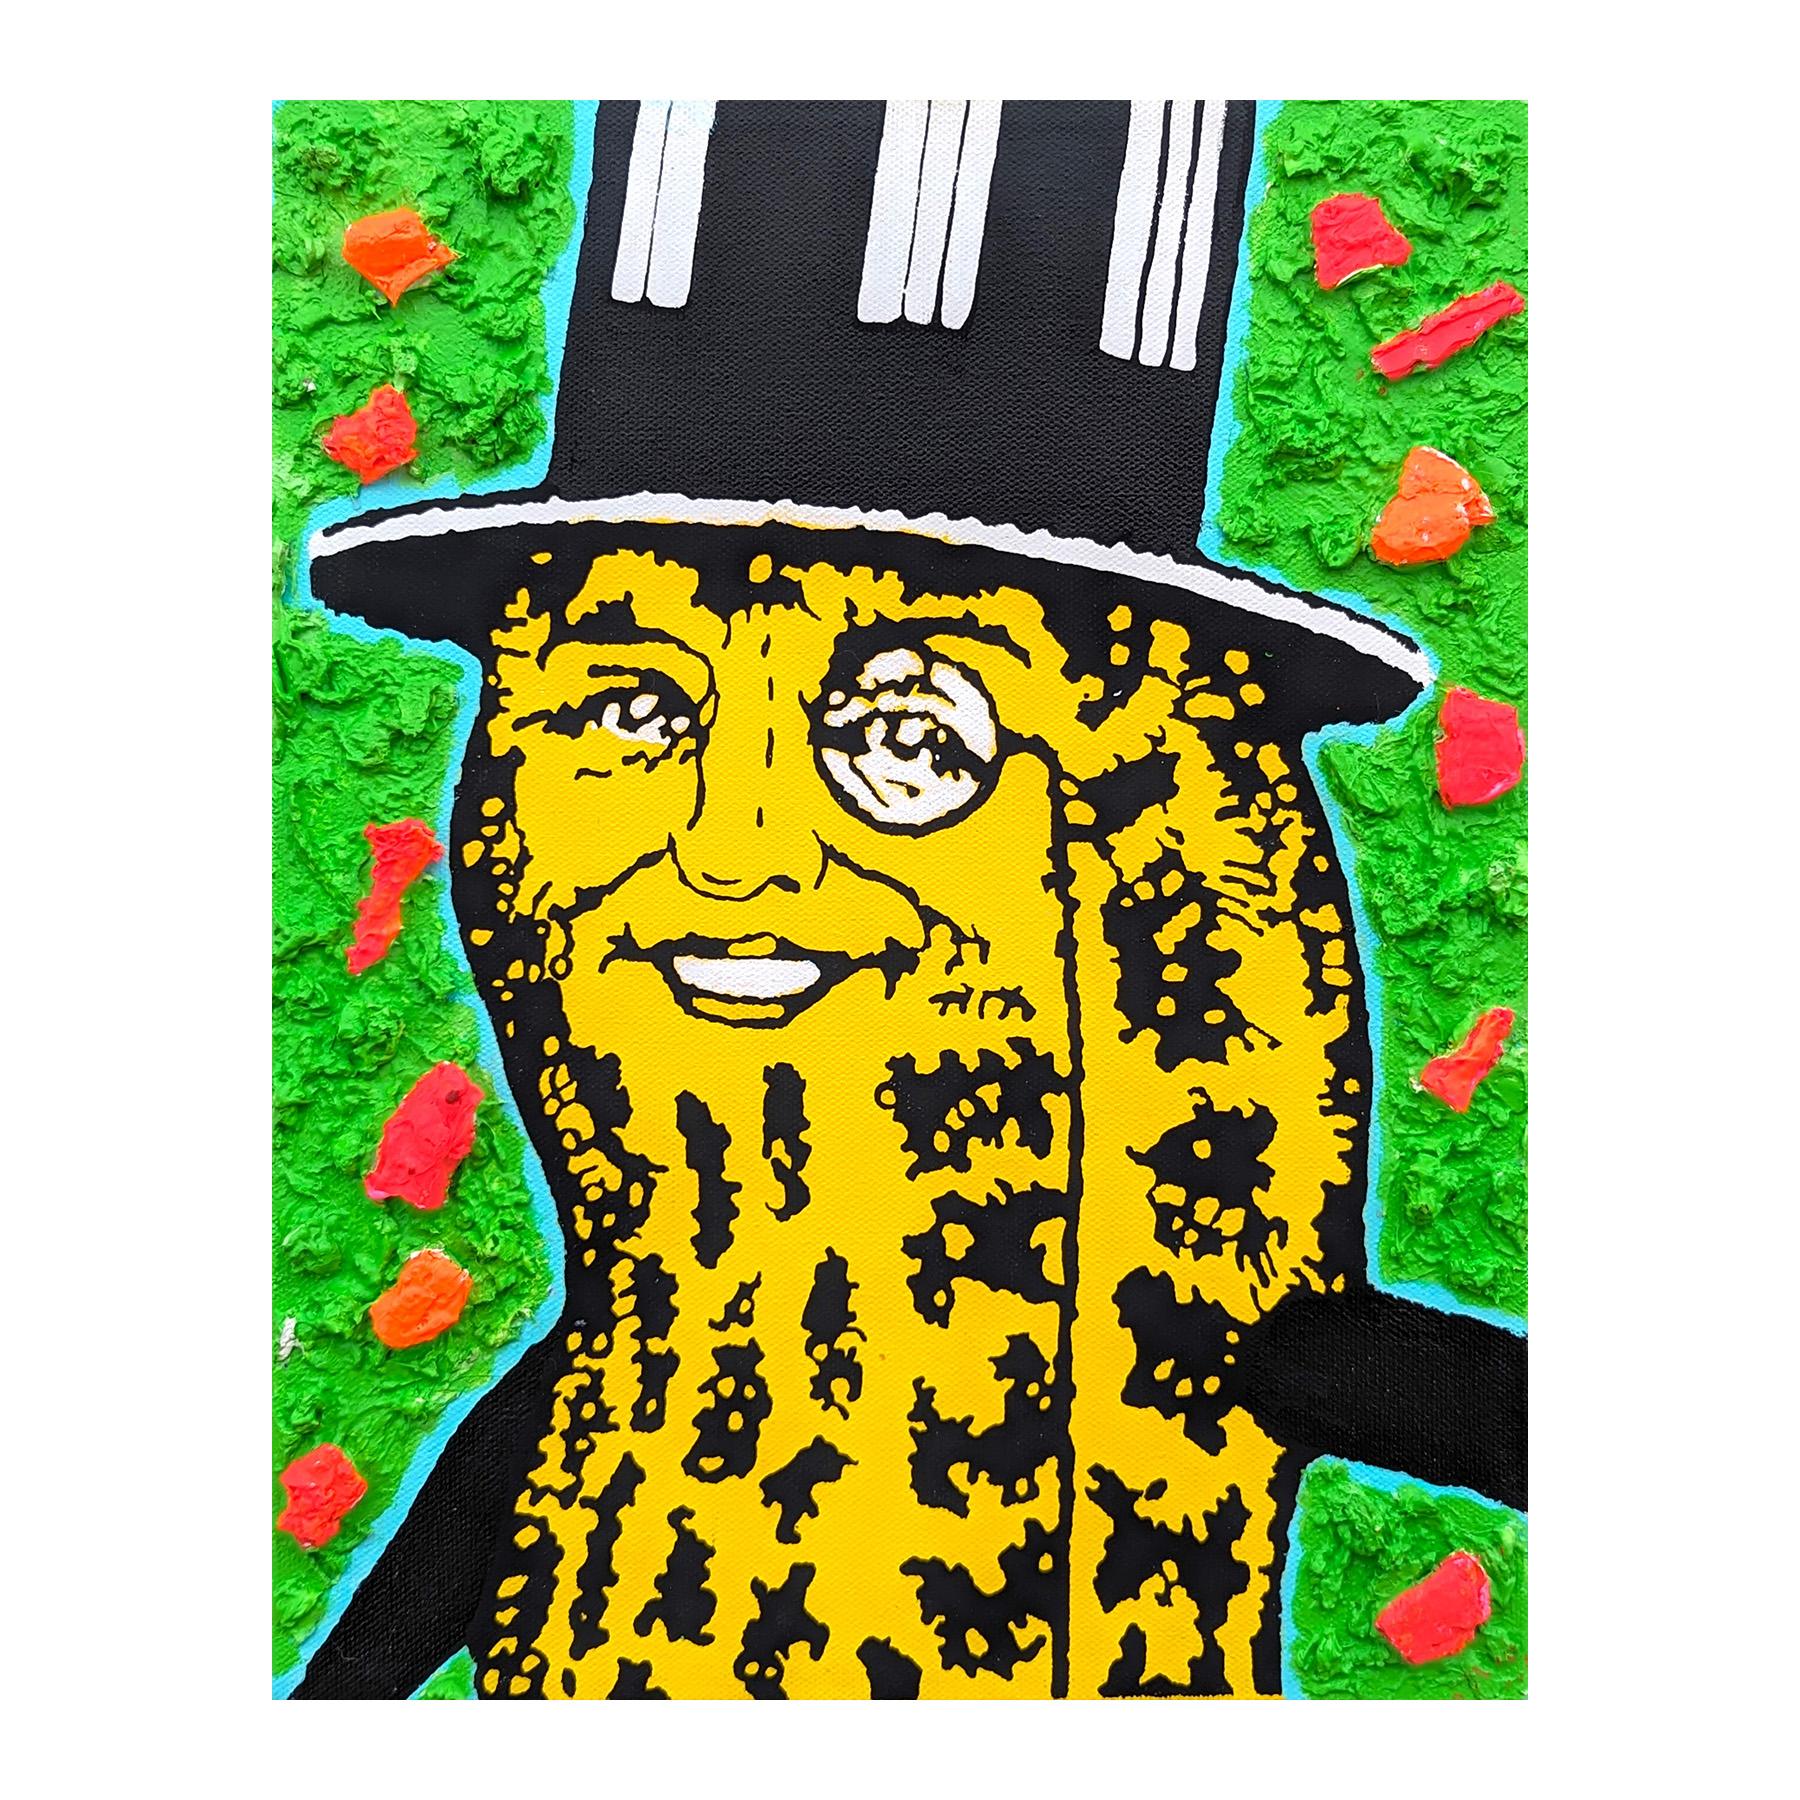 Contemporary pop culture inspired painting by Texas born artist Clark Fox. The work features Mr. Peanut set against a thick background of neon green and pink mound of paint. Currently unframed, but options are available. 

Artist Biography: Clark V.